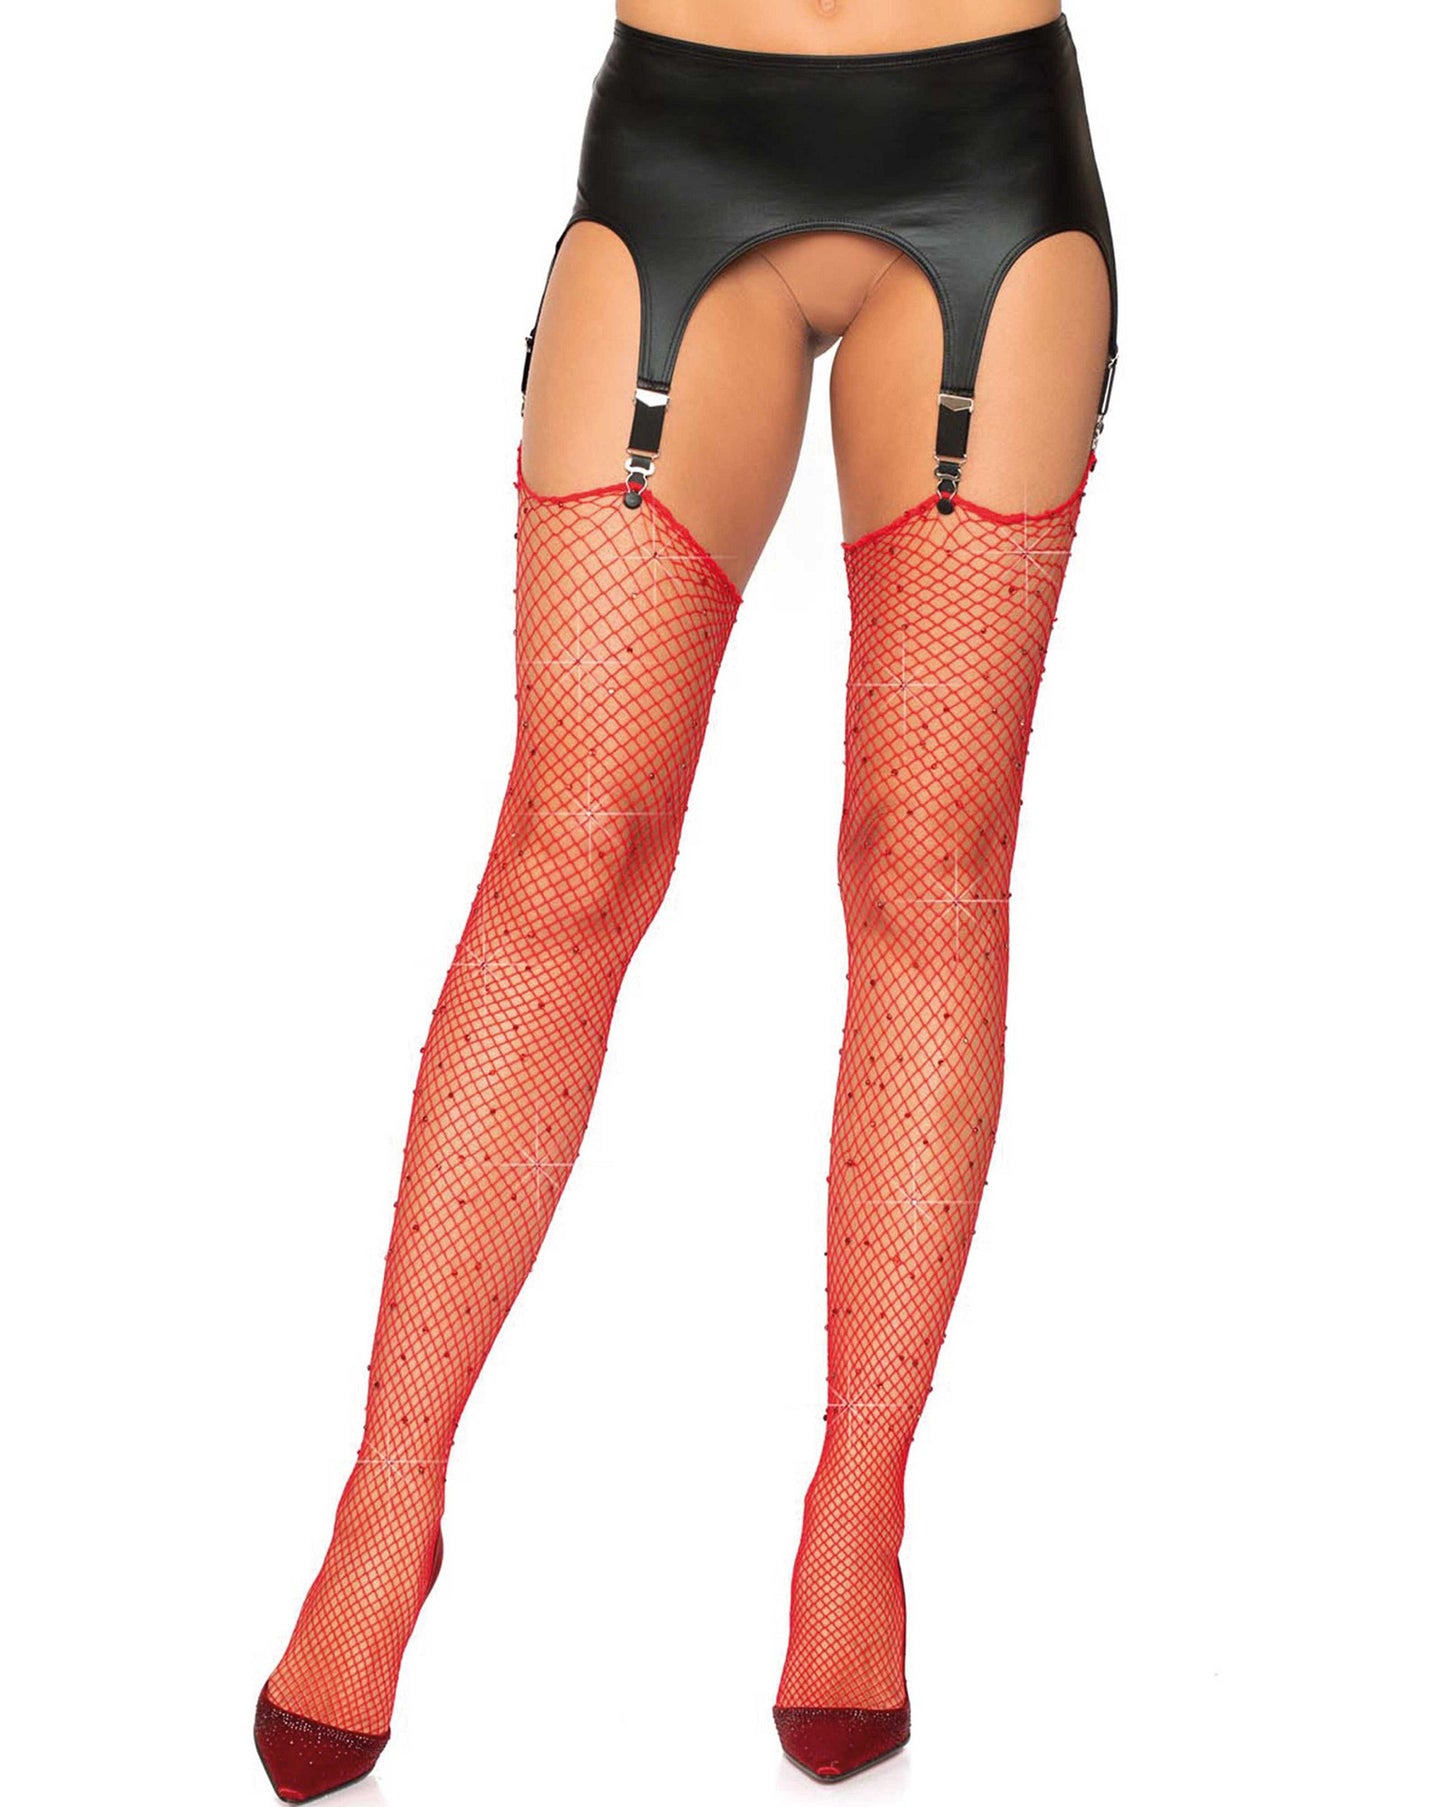 Leg Avenue 9124 Rhinestone Fishnet Stockings - Red diamond fishnet stockings for suspender belt with diamante' jewel crystals dotted all over and an unfinished top